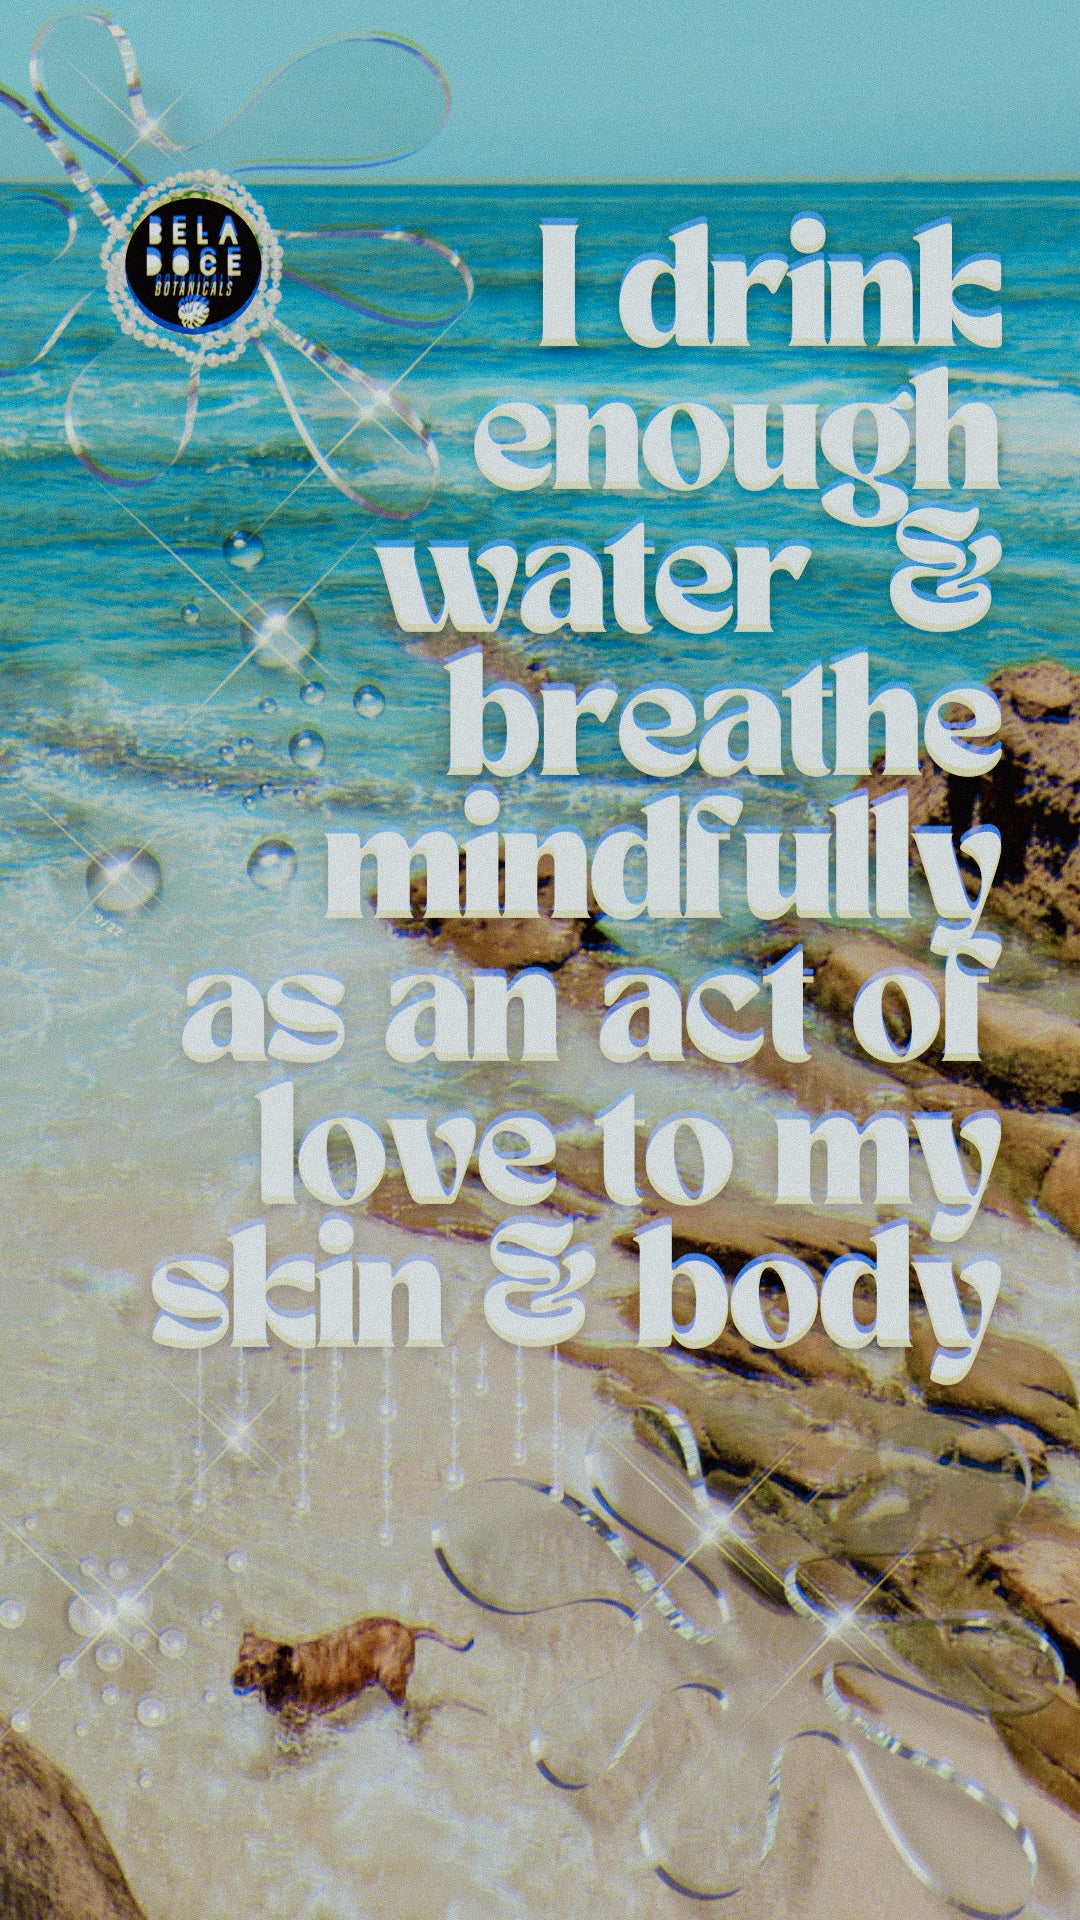 I drink enough water and breathe mindfully as an act of love to my skin & body image description La Jolla windansea beach view from cliffs looking down at the ocean